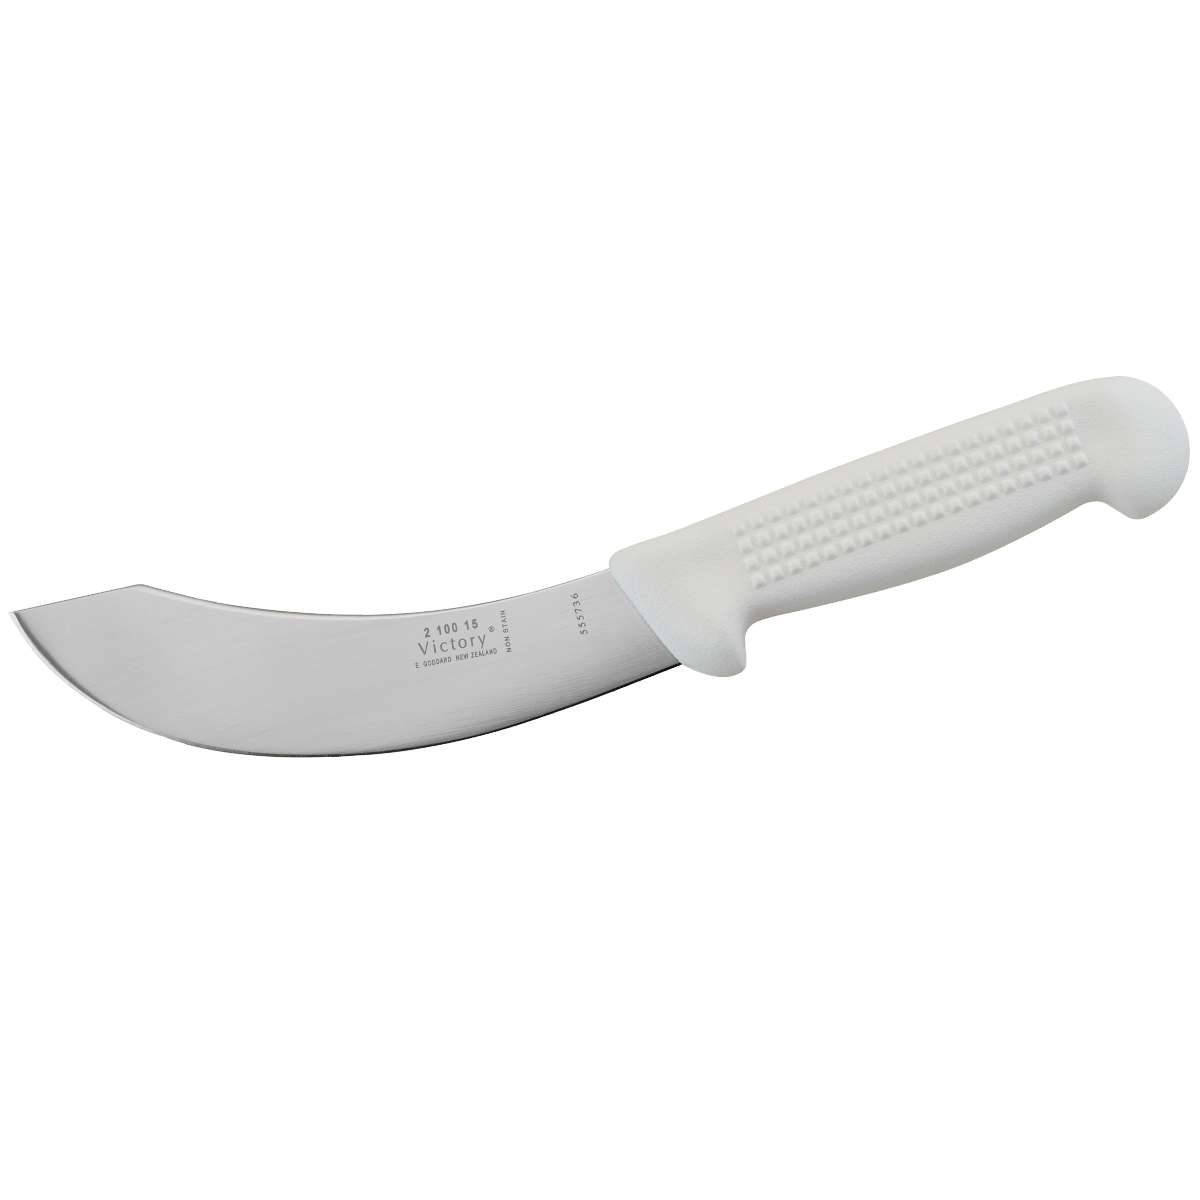 Victory Skinning Knife, 6” Inch (15cm) - White